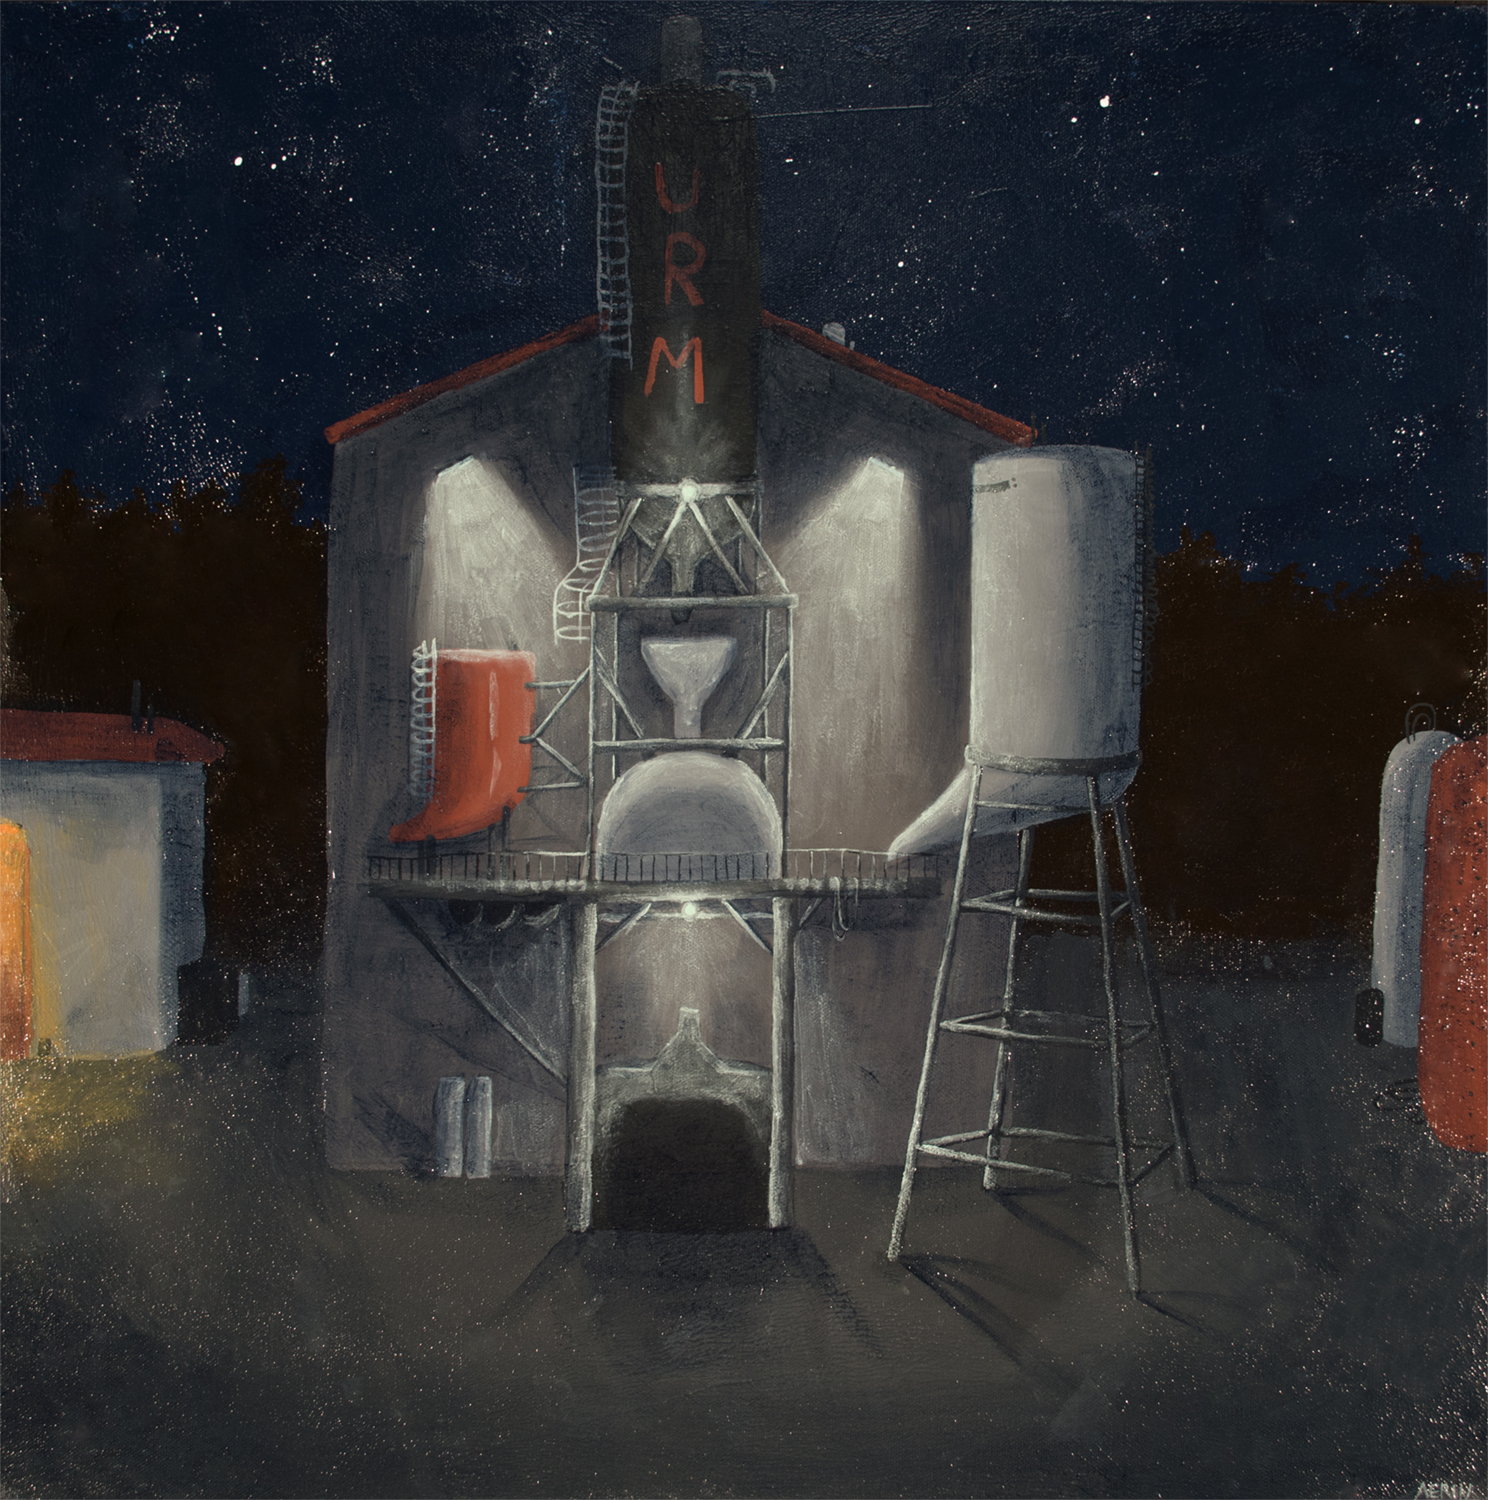 An industrial building lit up at night, courtesy of the artist